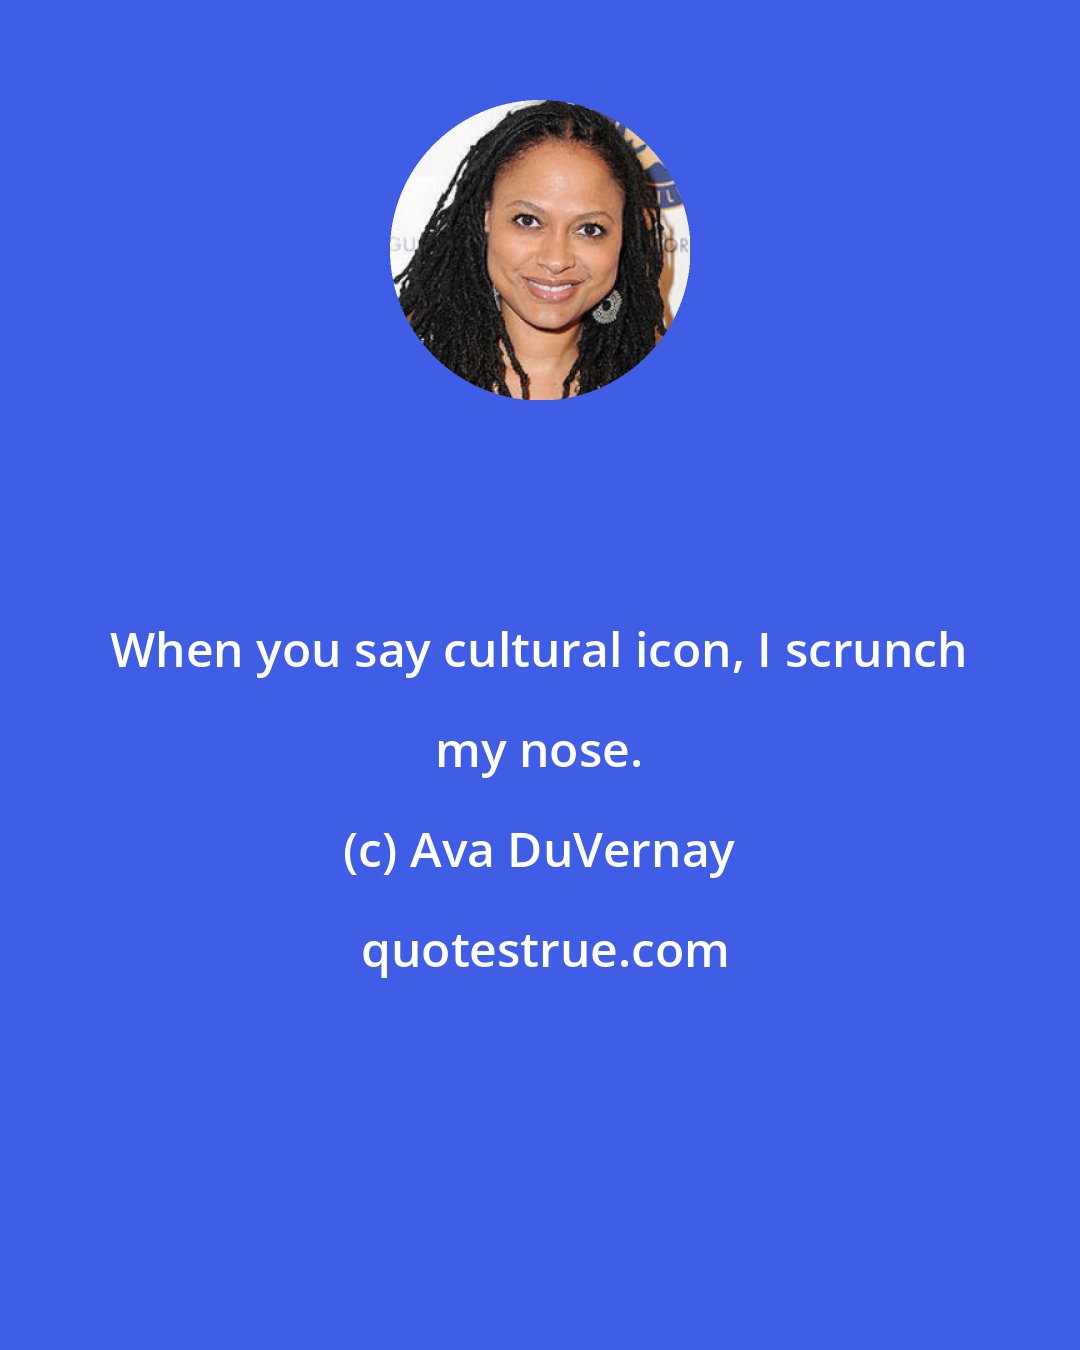 Ava DuVernay: When you say cultural icon, I scrunch my nose.